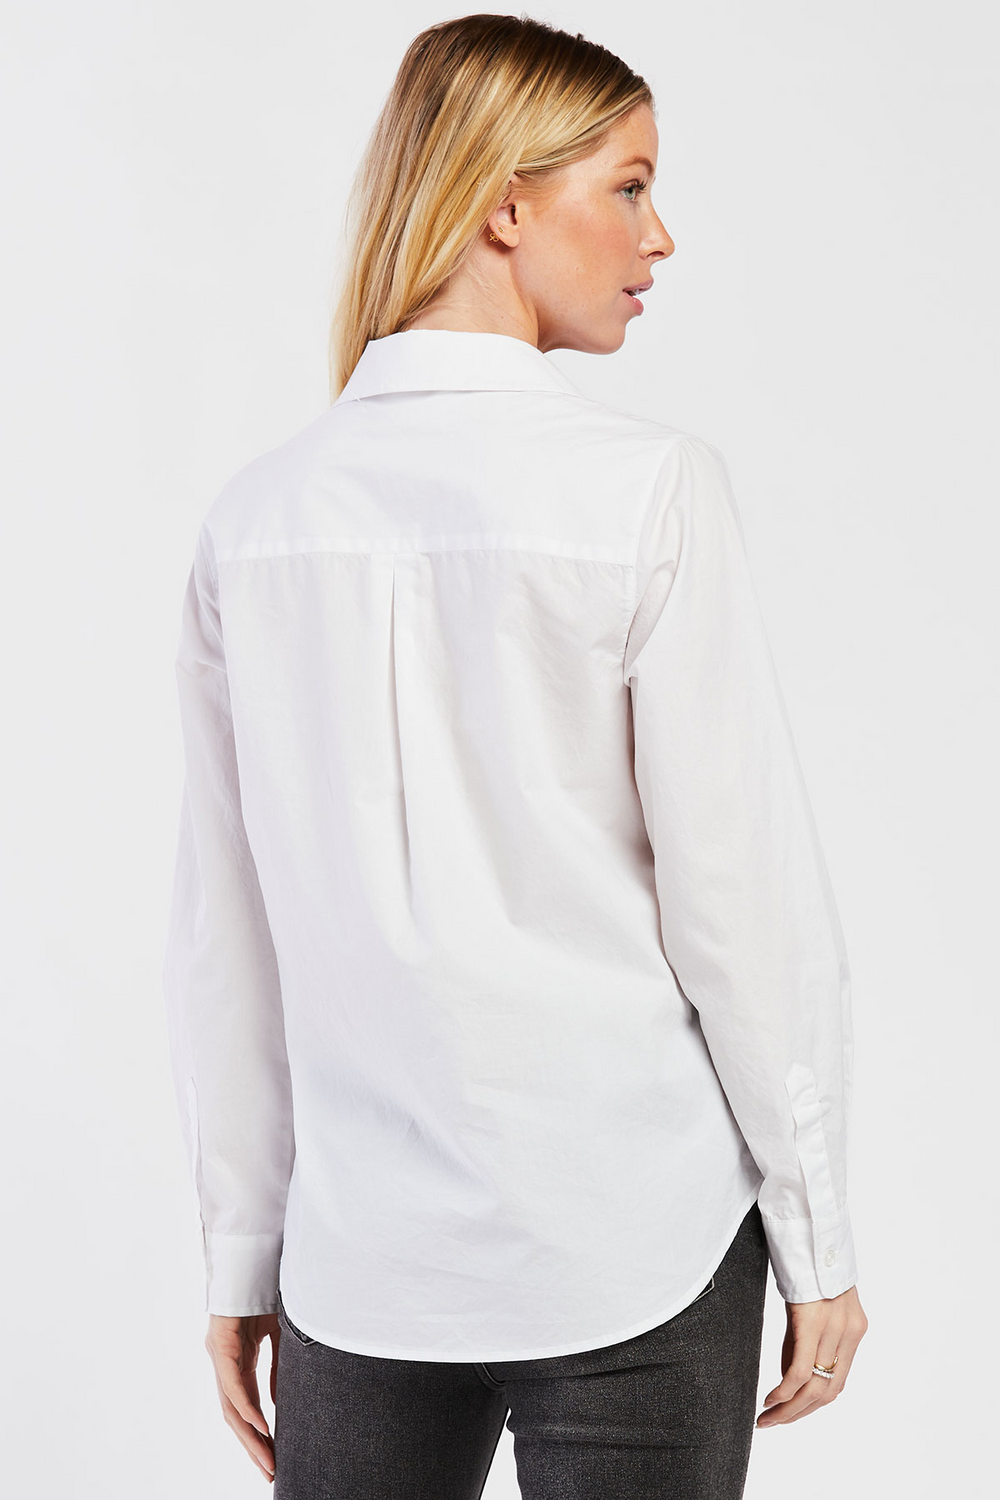 CHELINA TOP - WHITE - Kingfisher Road - Online Boutique